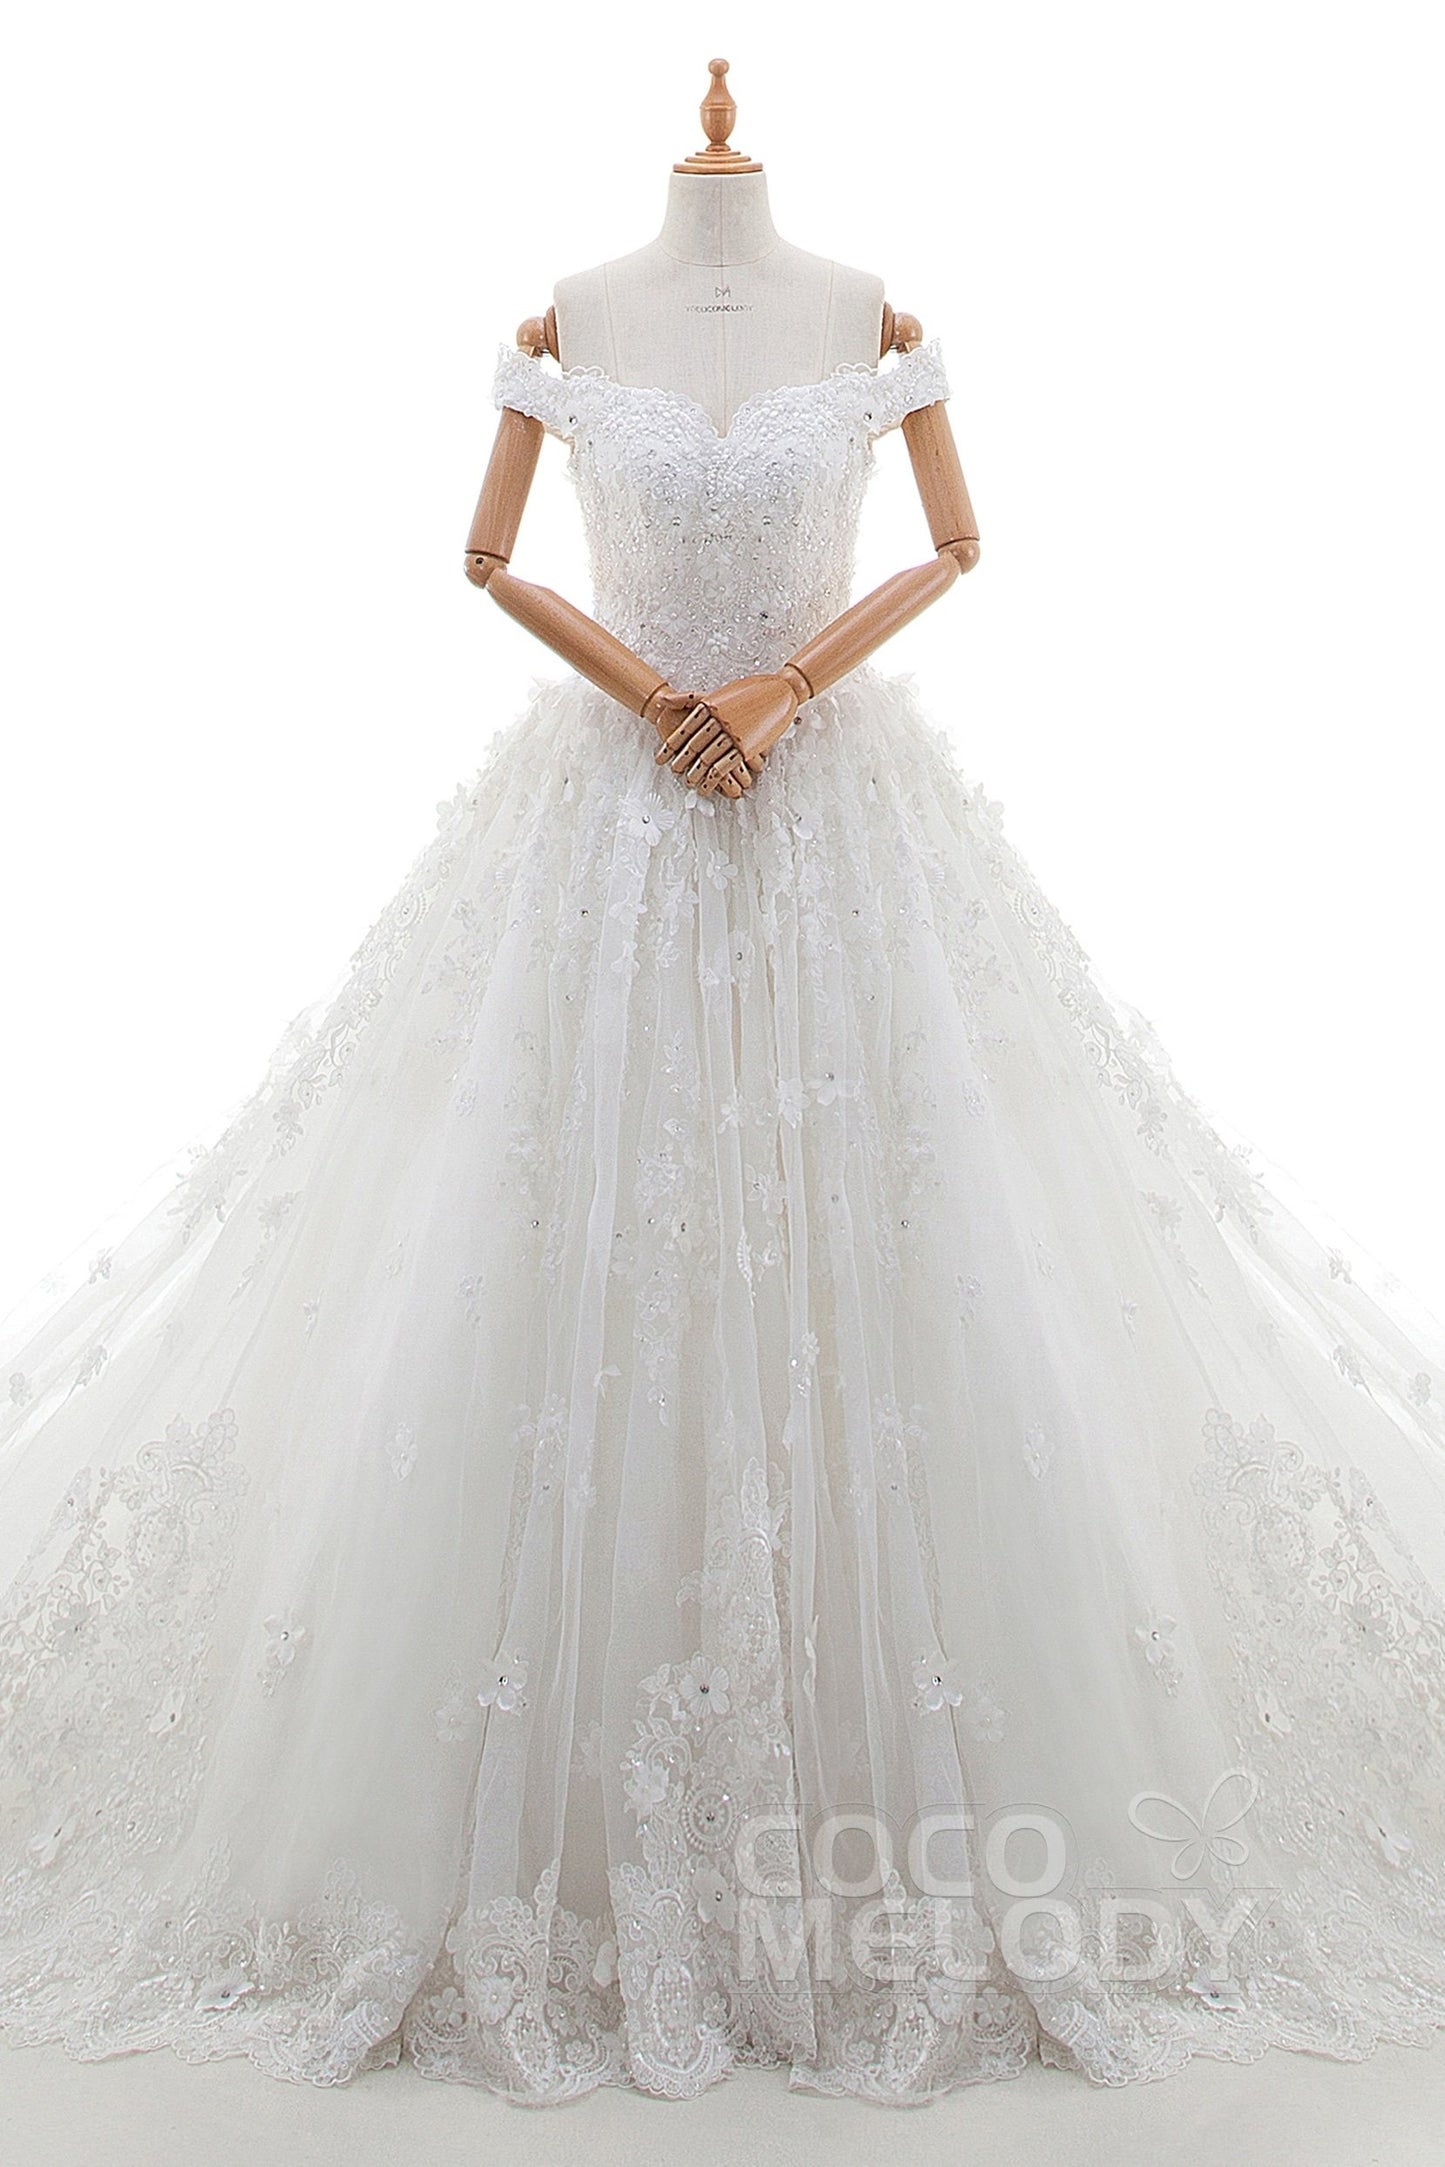 Princess Cathedral Train Tulle and Lace Wedding Dress LD4349